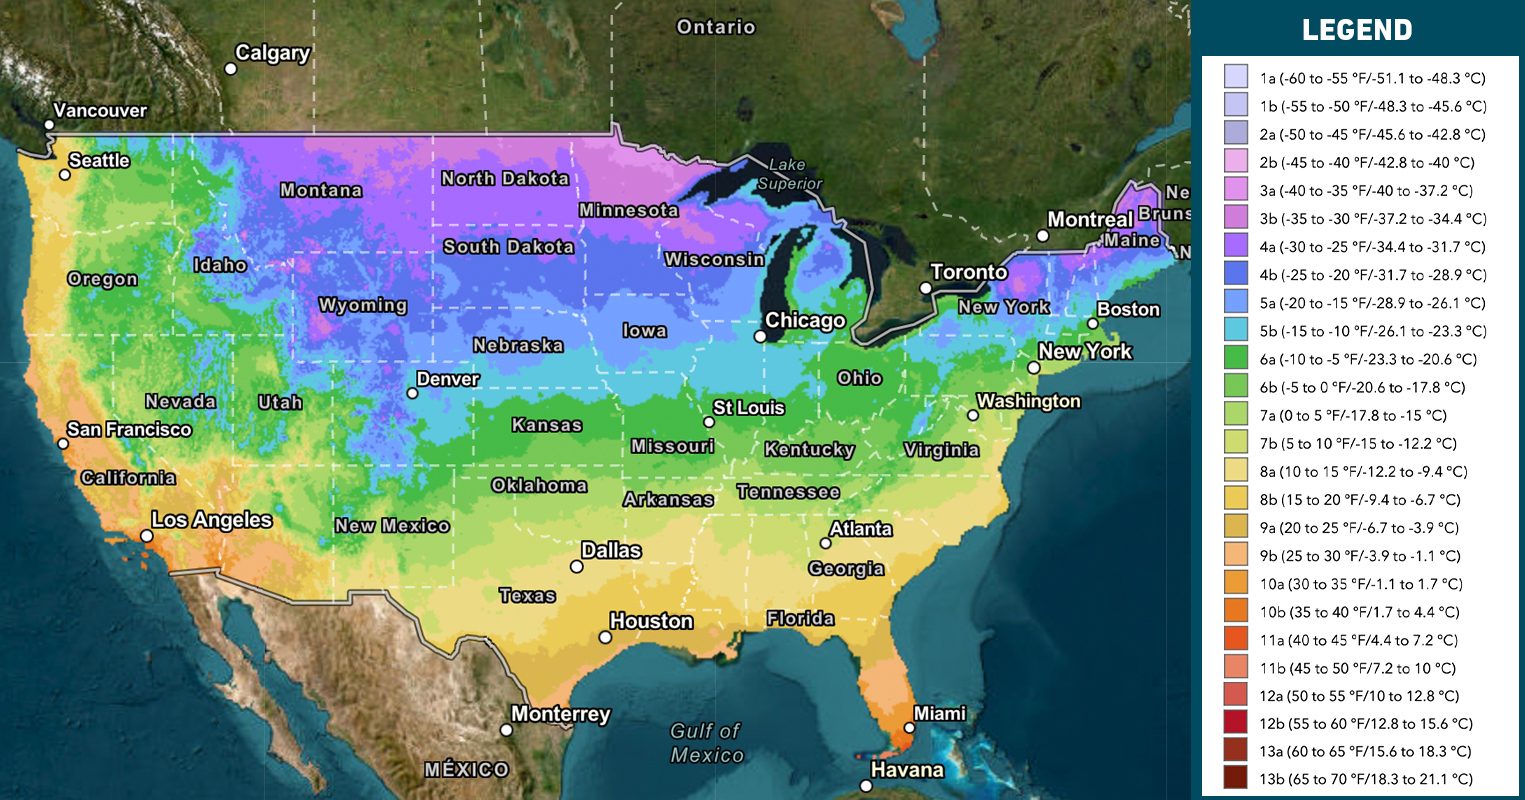 Fhm What Is A Plant Hardiness Zone And How Do I Find Mine? With Key Via Planthardiness.ars.usda.gov